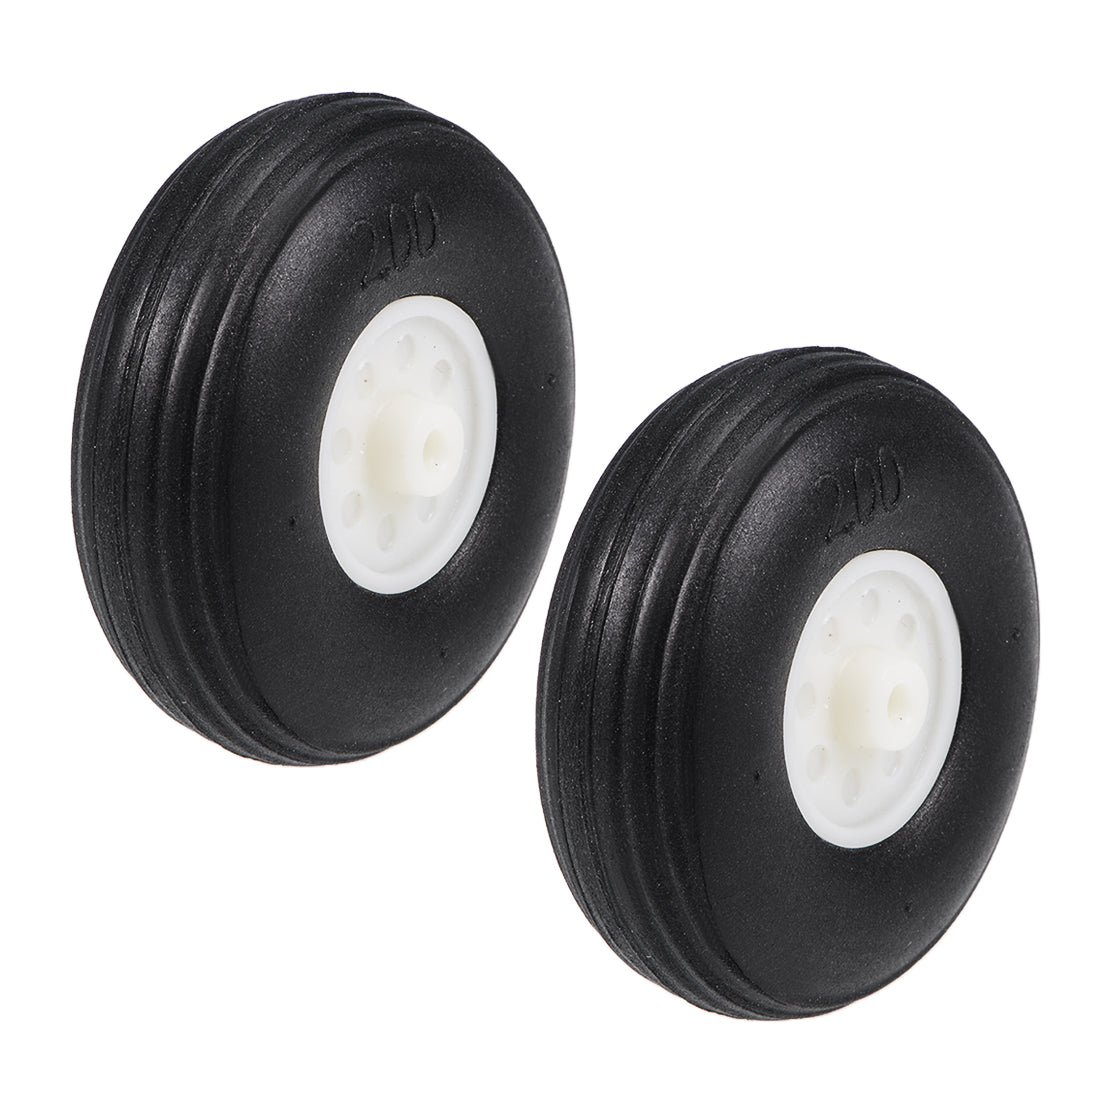 uxcell Uxcell Tire and Wheel Sets for RC Car Airplane,PU Sponge Tire with Plastic Hub,2" 2pcs